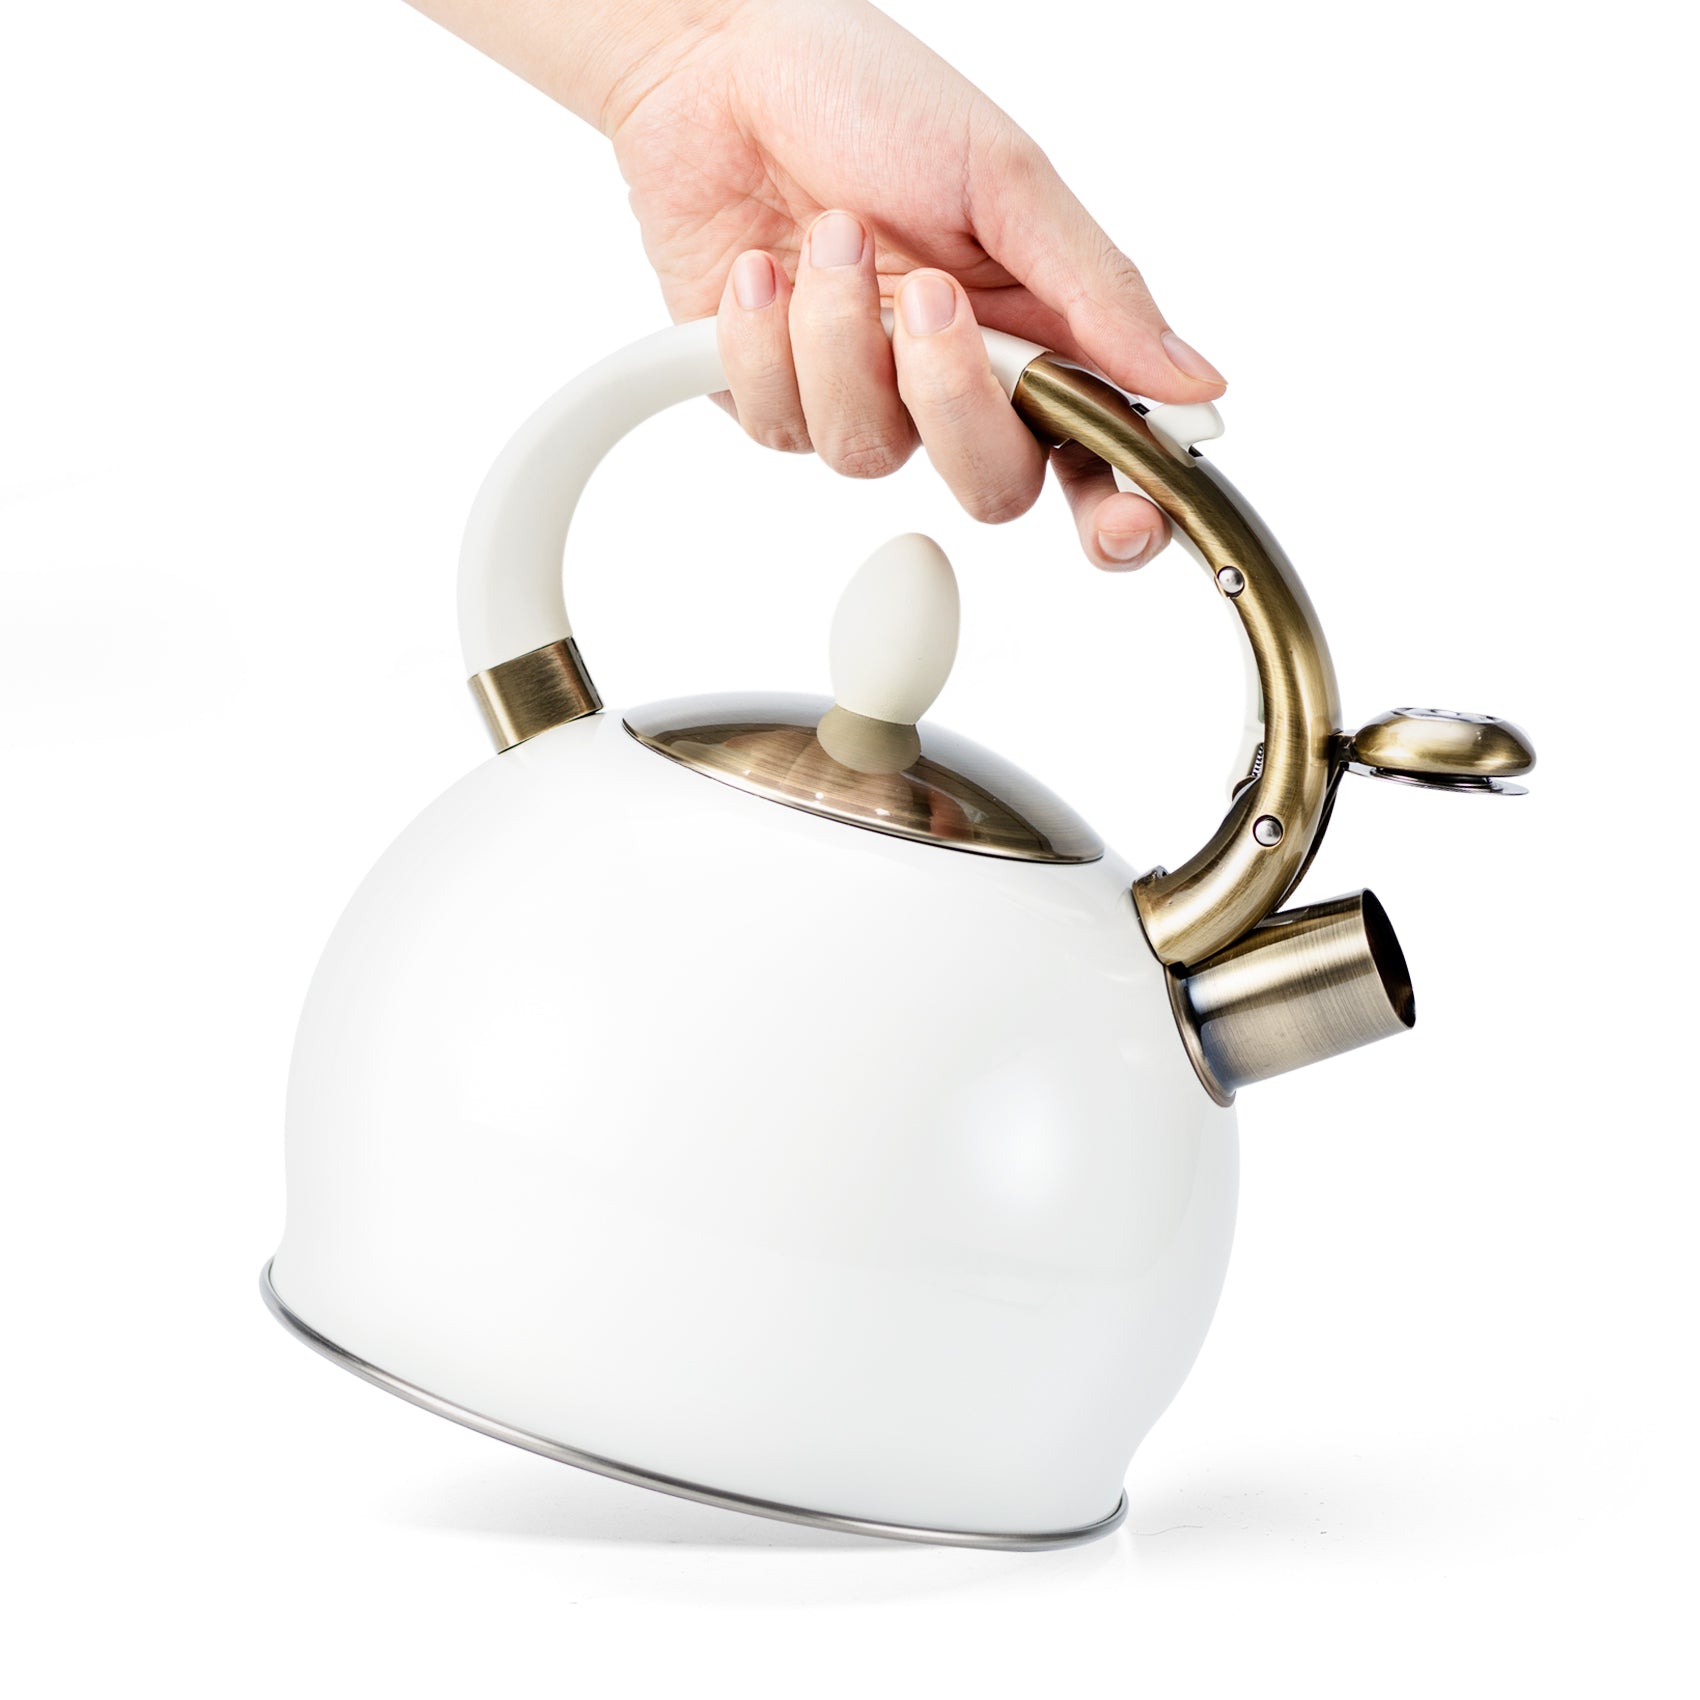 SUSTEAS Stove Top Whistling Tea Kettle-Surgical Stainless Steel Teakettle Teapot with Cool Touch Ergonomic Handle1 Free Silicone Pinch Mitt Included3l